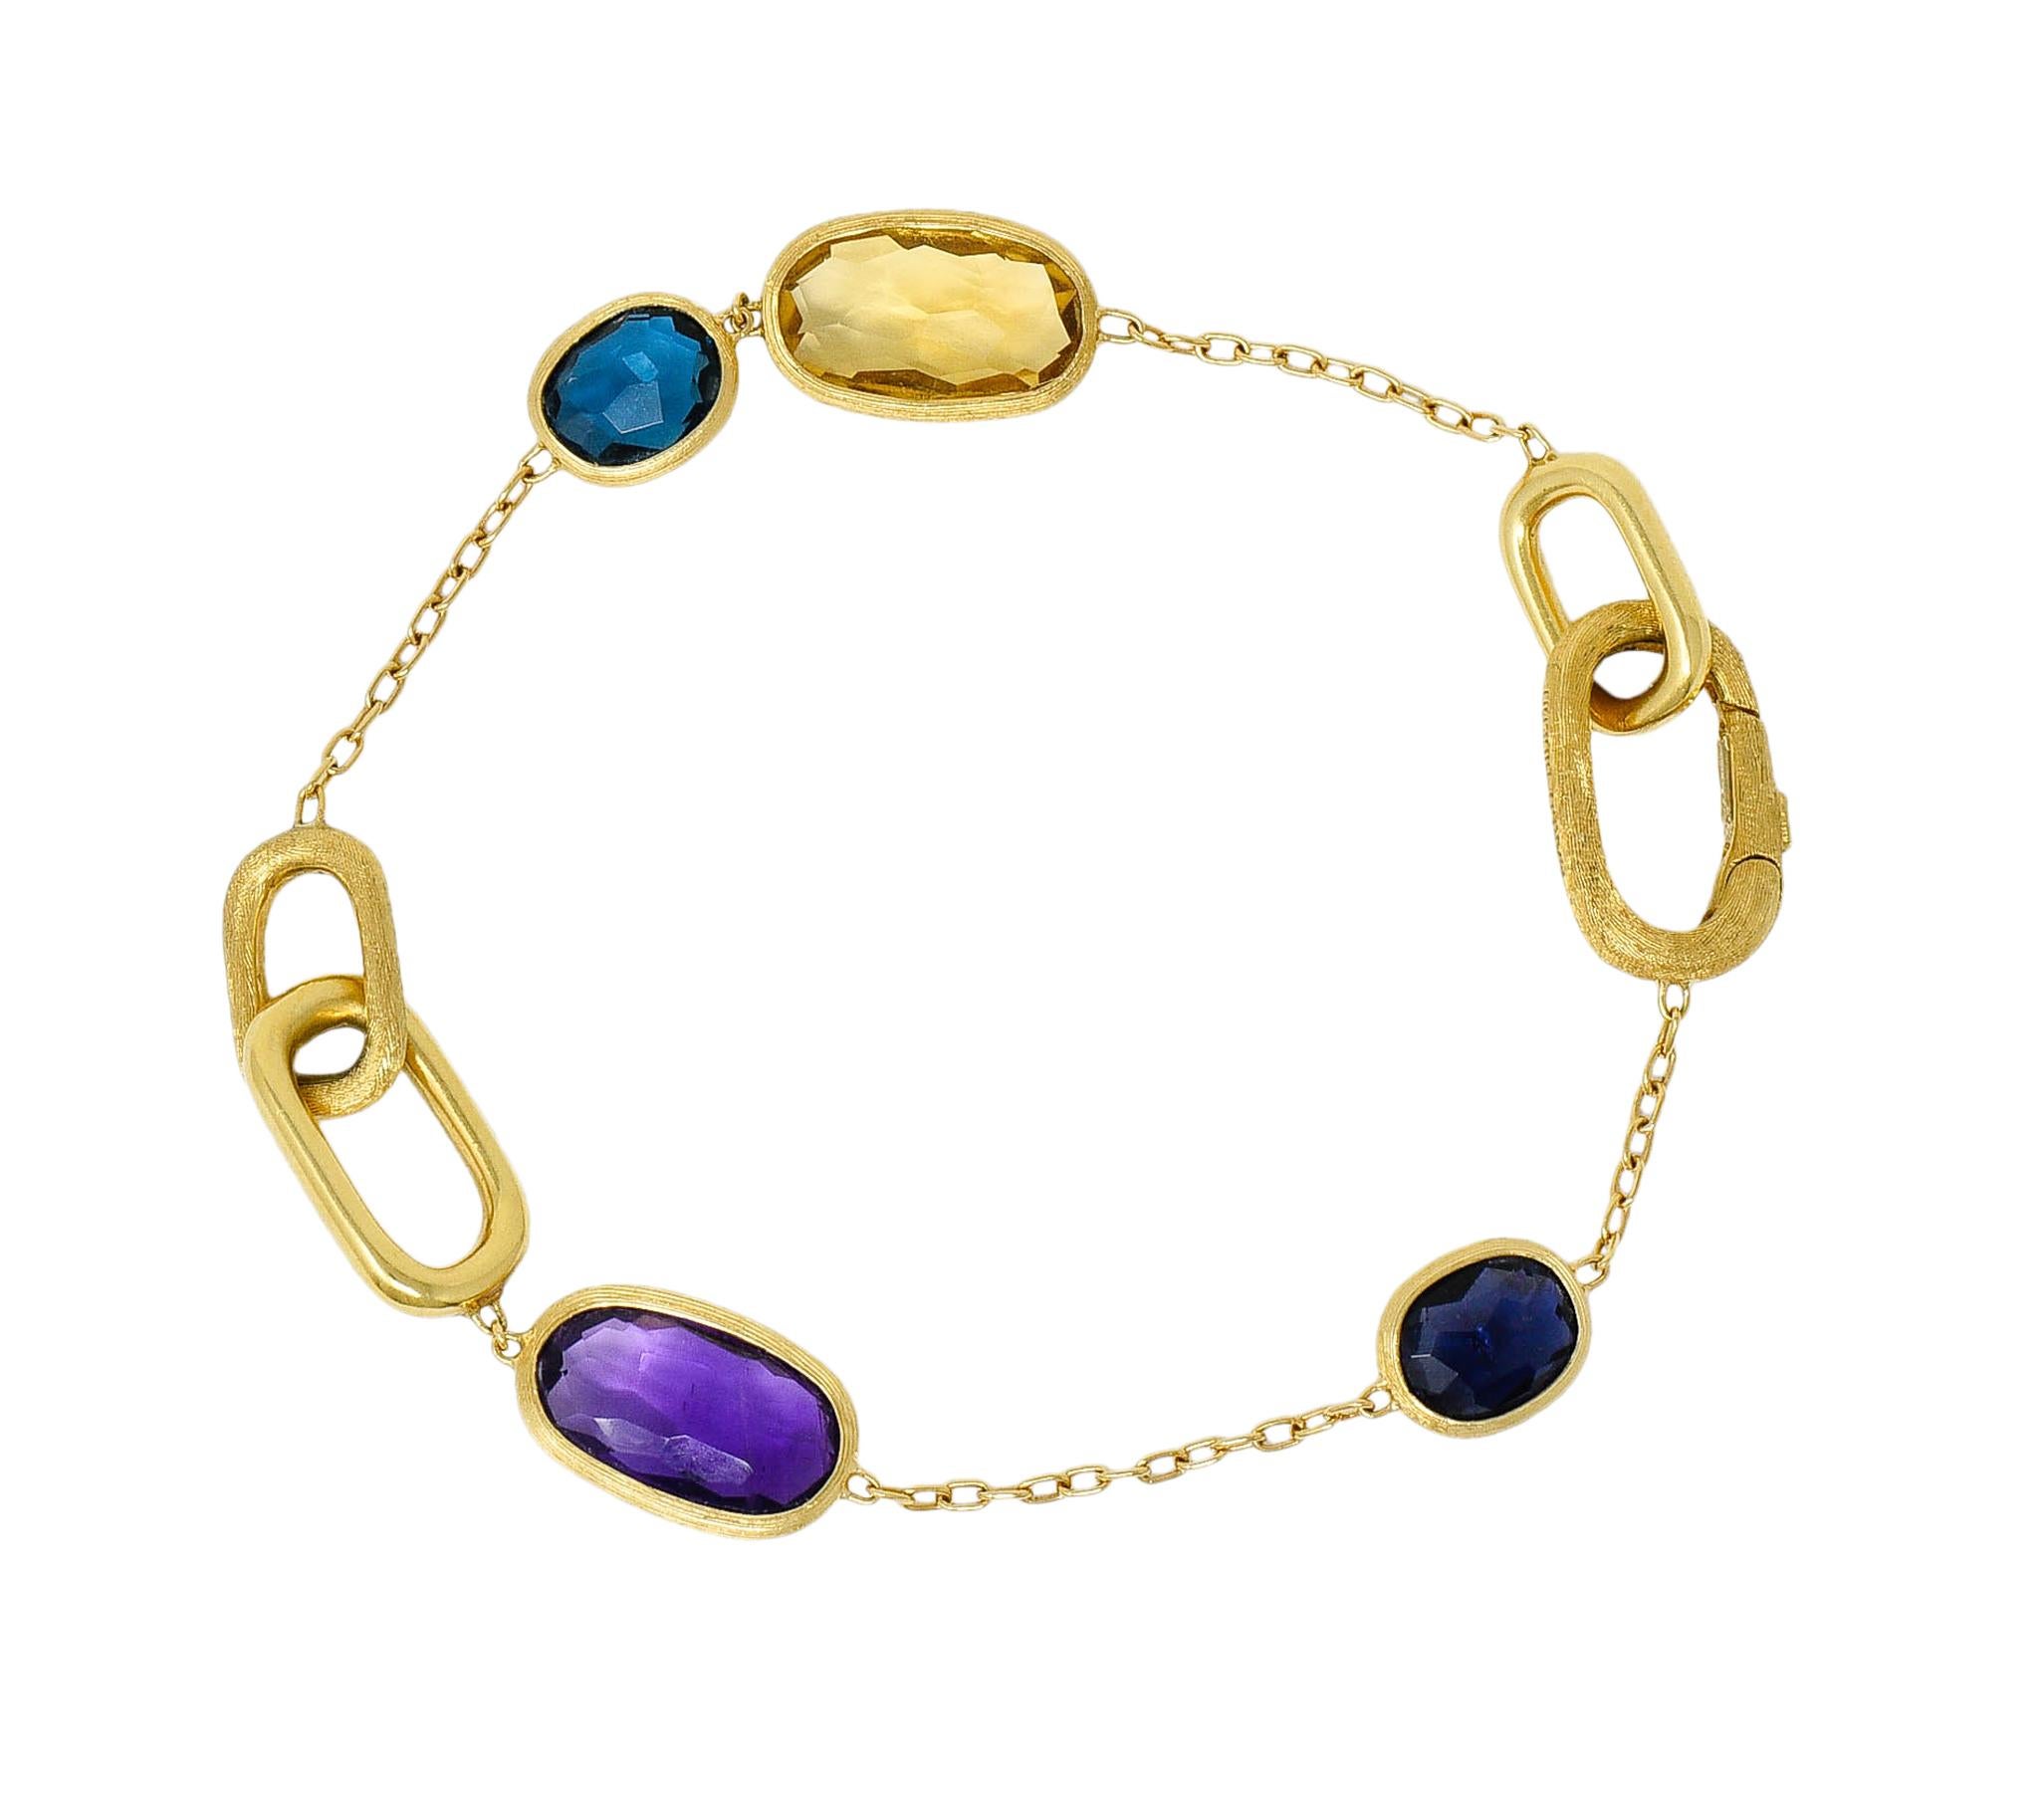 Stylized cable chain bracelet features faceted mixed cushion cut gemstone stations

Blue topaz, iolite, citrine, and amethyst; all bezel set in strongly brushed gold

Accented by oversized cushion style links with a strongly brushed finish and a